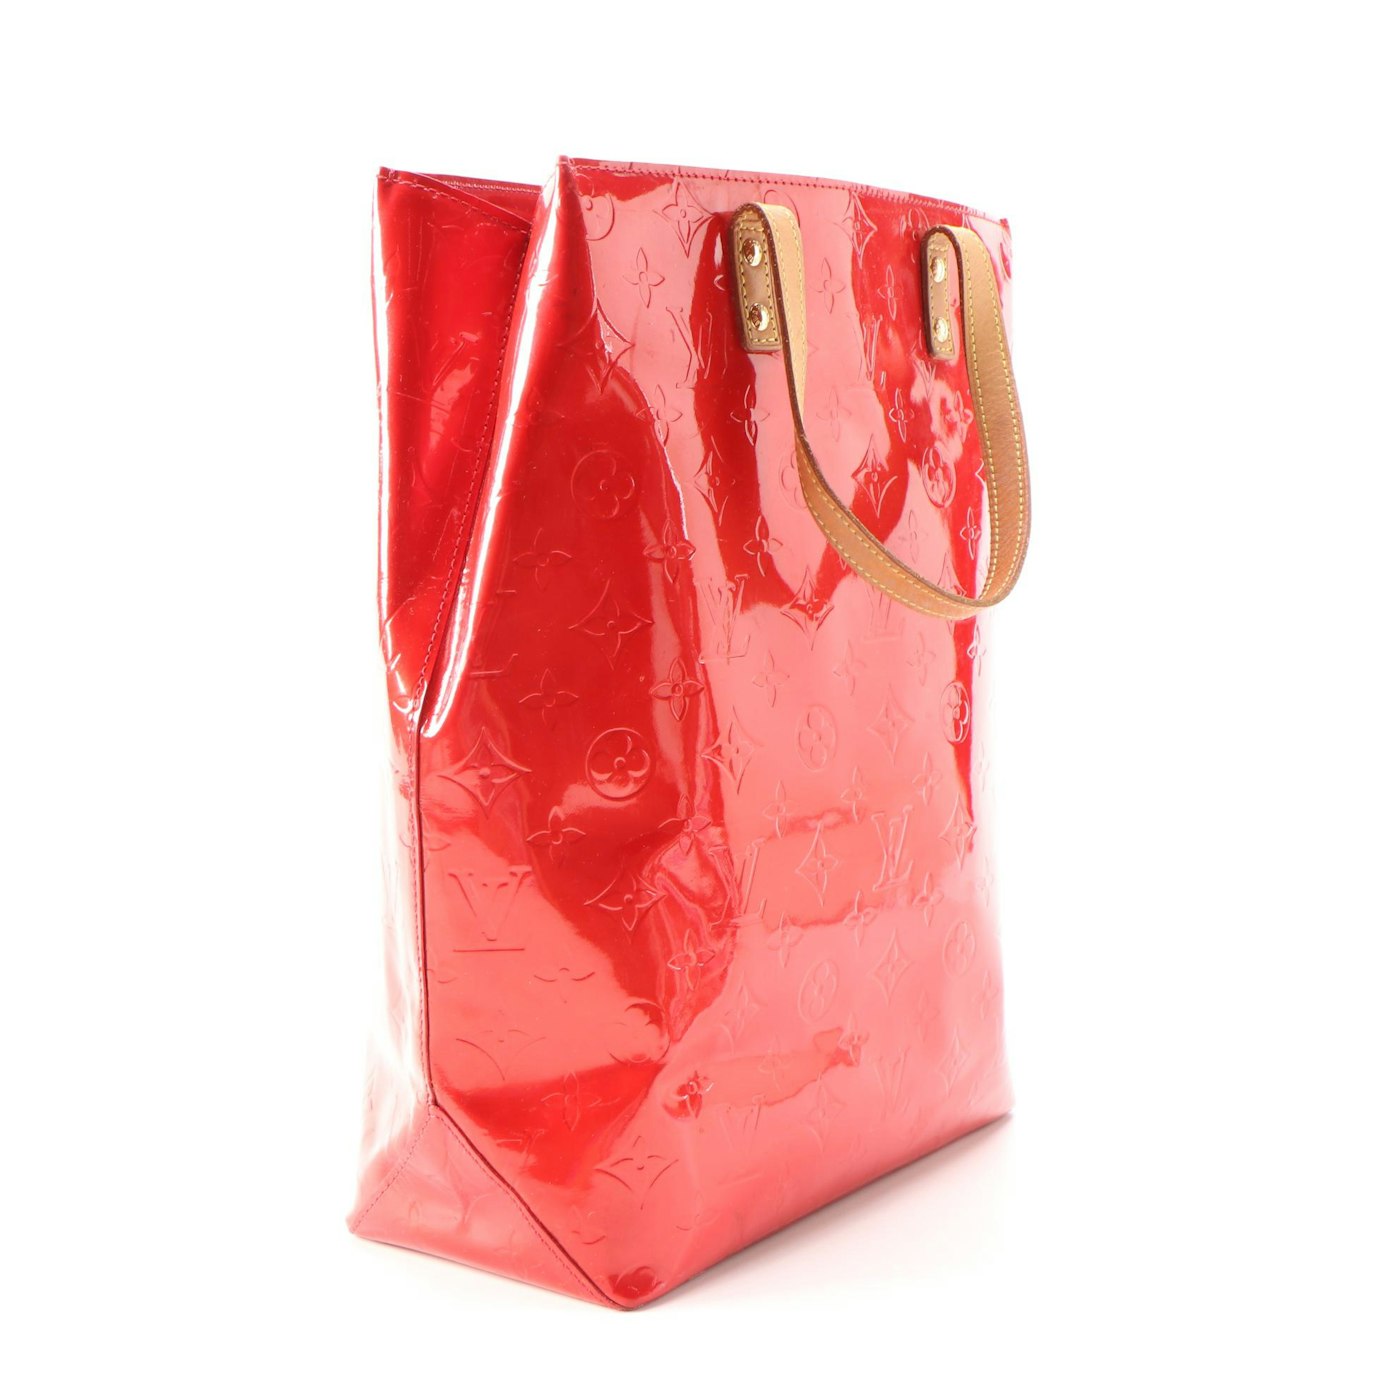 Louis Vuitton Reade MM Tote in Red Monogram Vernis and Vachetta Leather | EBTH